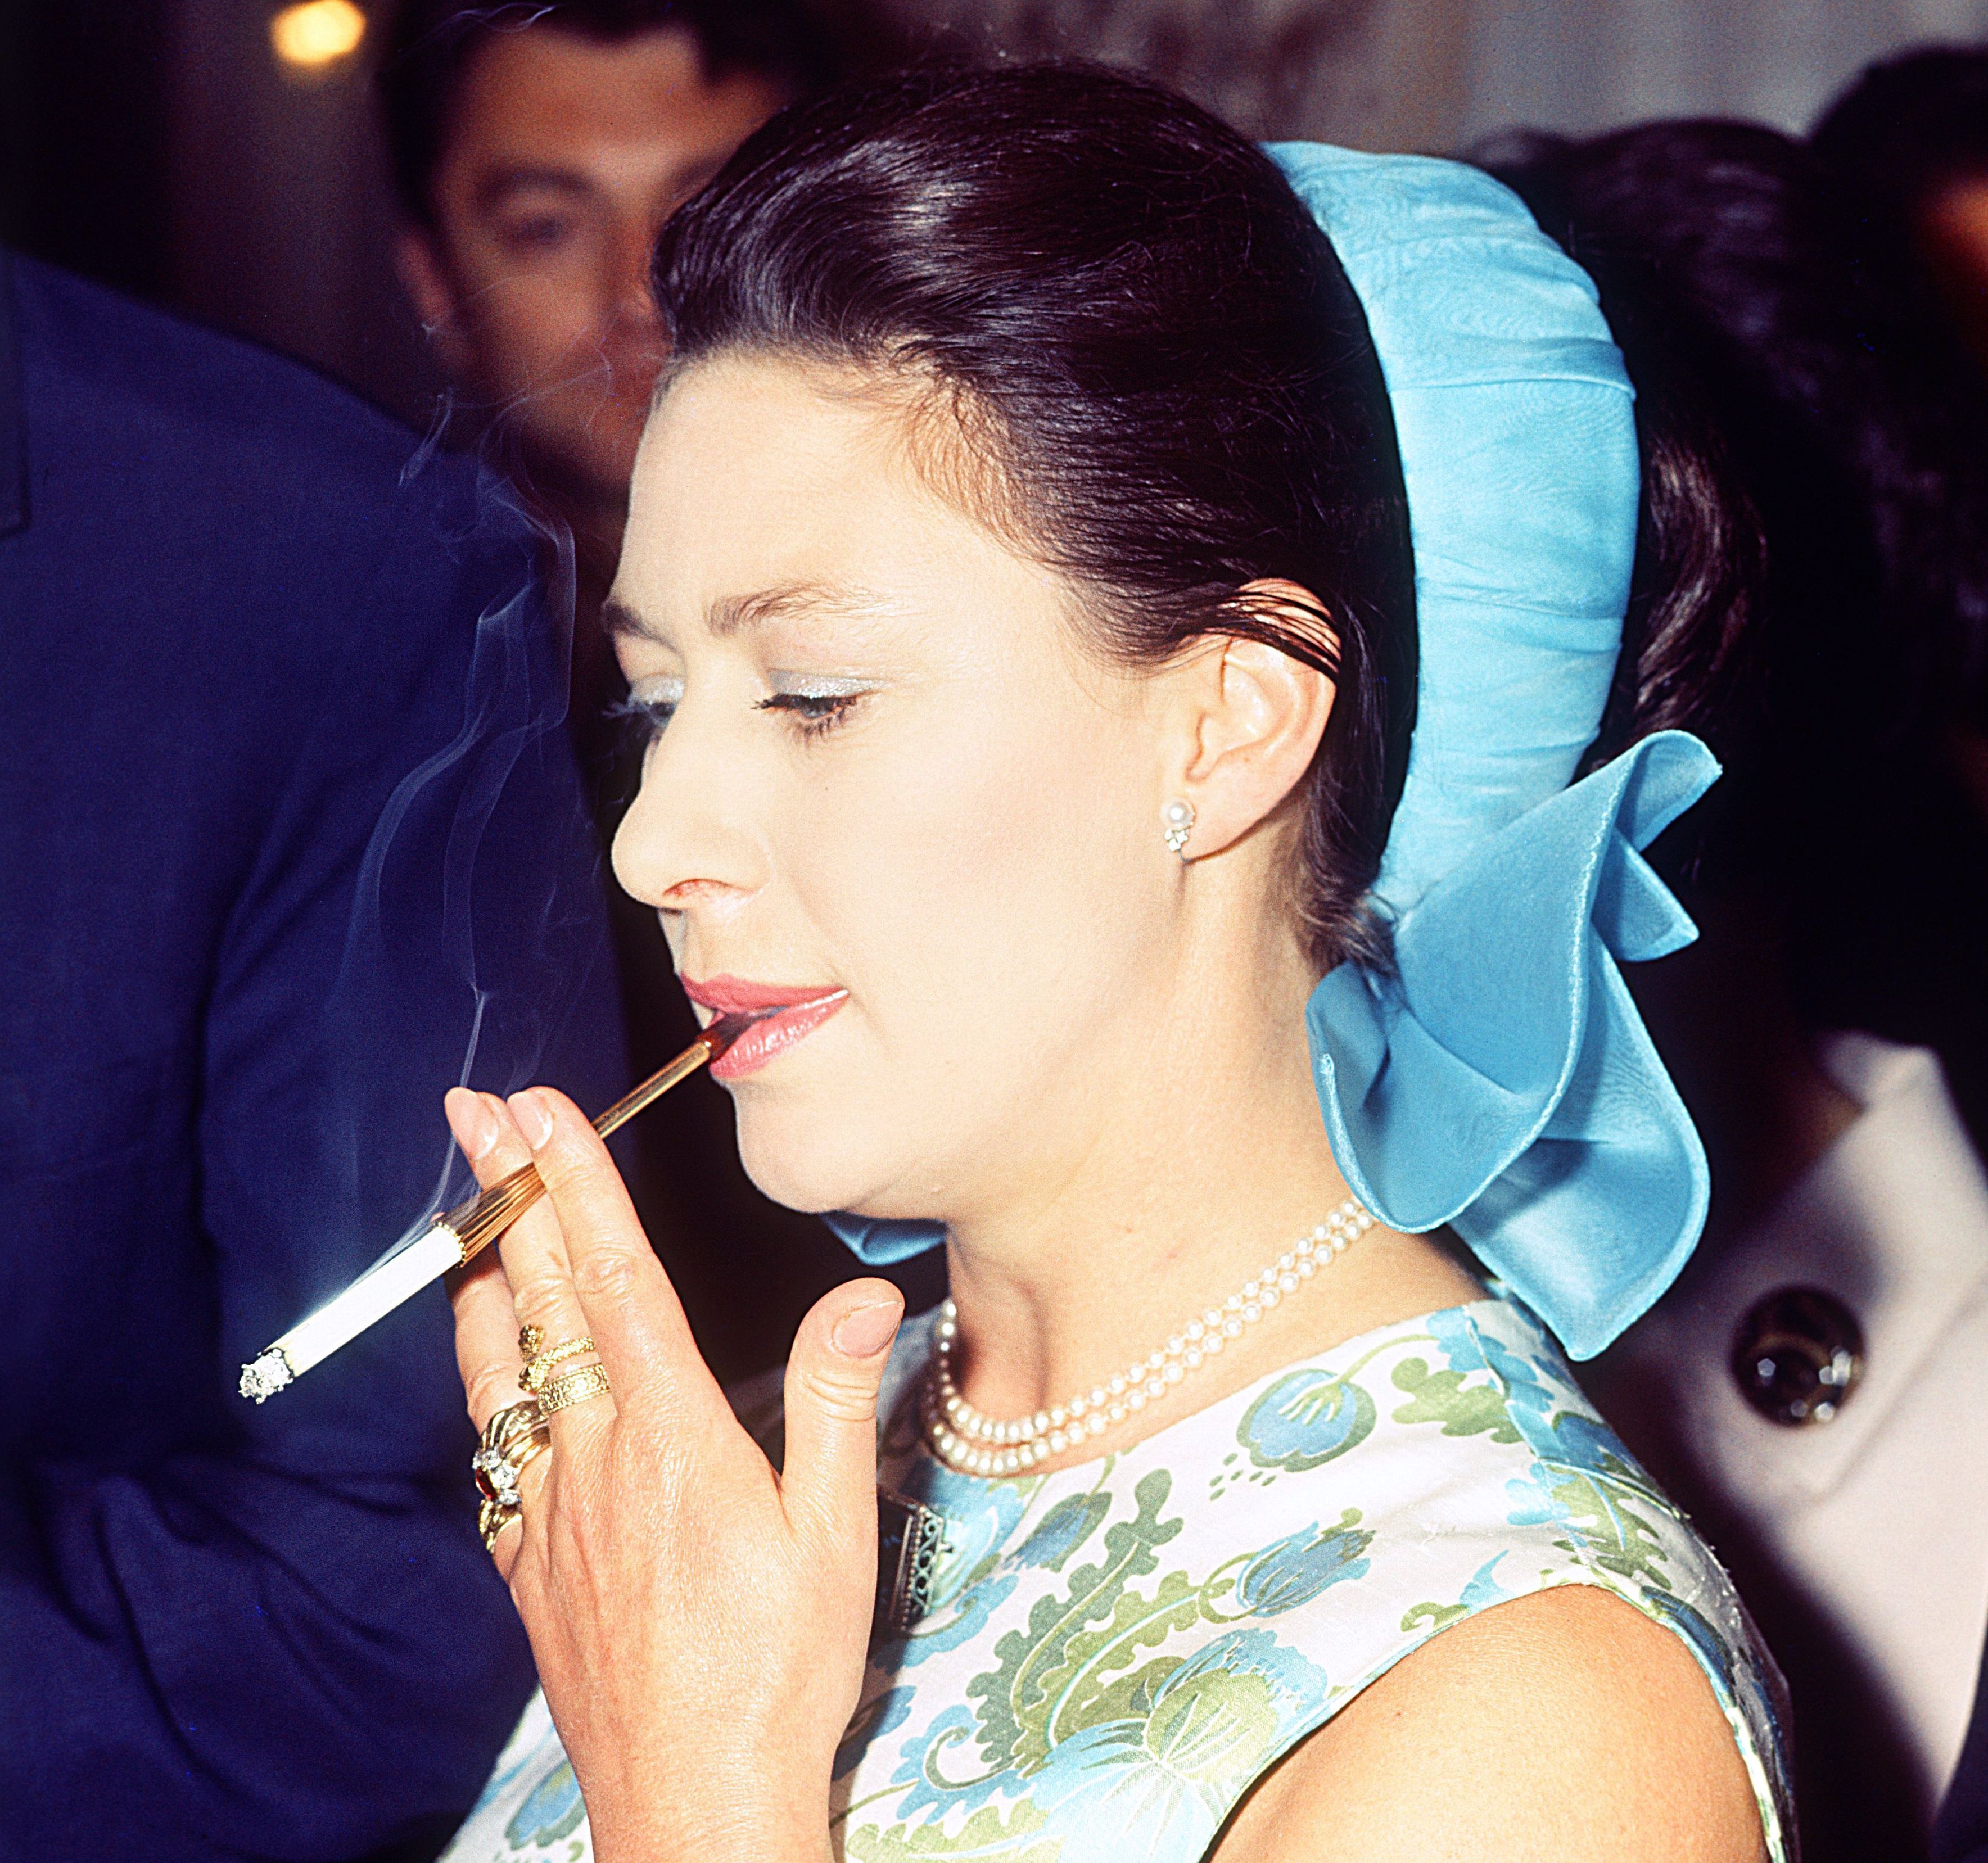 Margaret, pictured in 1970, had a penchant for alcohol and cigarettes